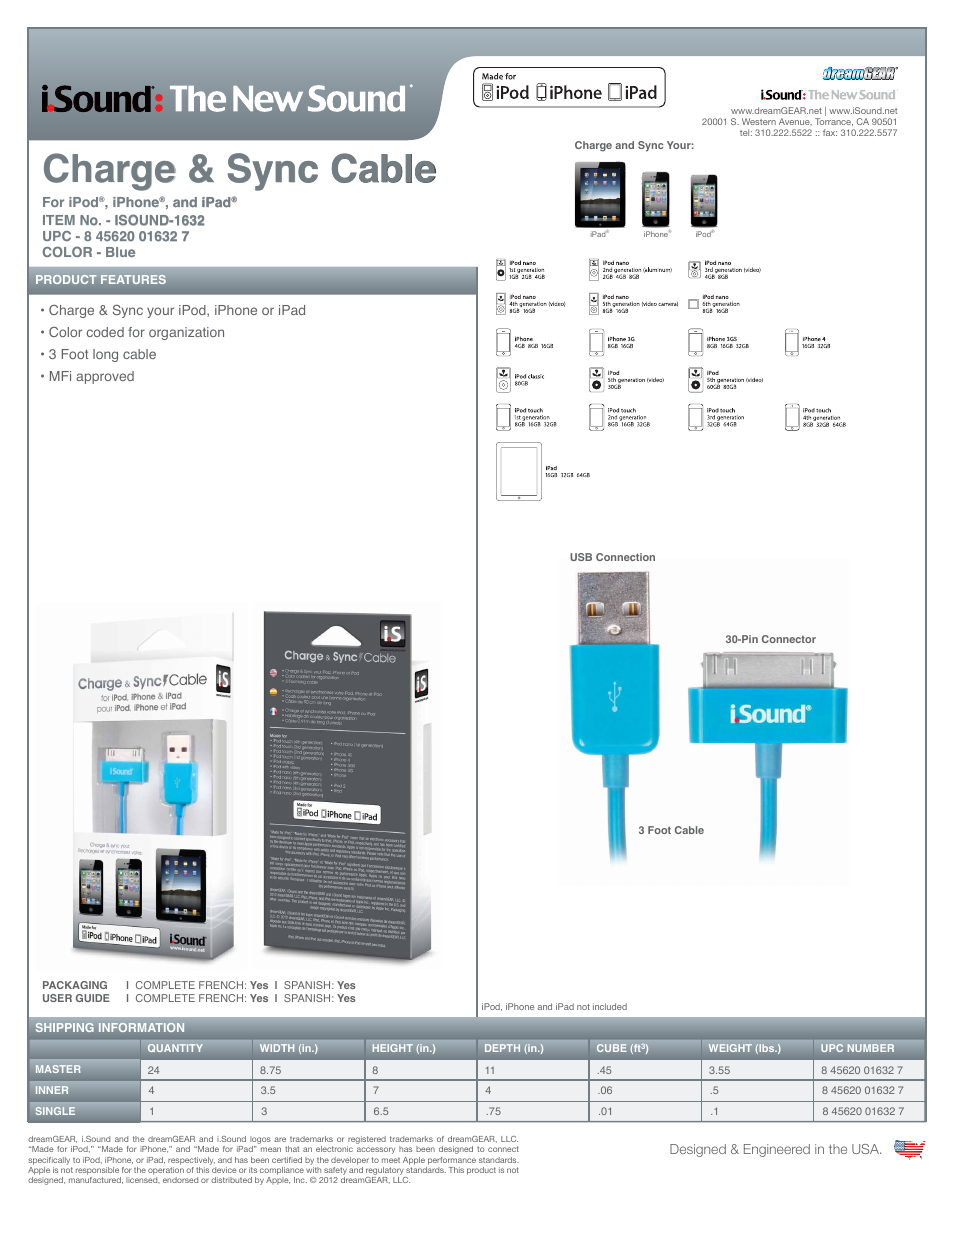 Charge & Sync Cable for iPad, iPhone and iPod - Sell Sheet